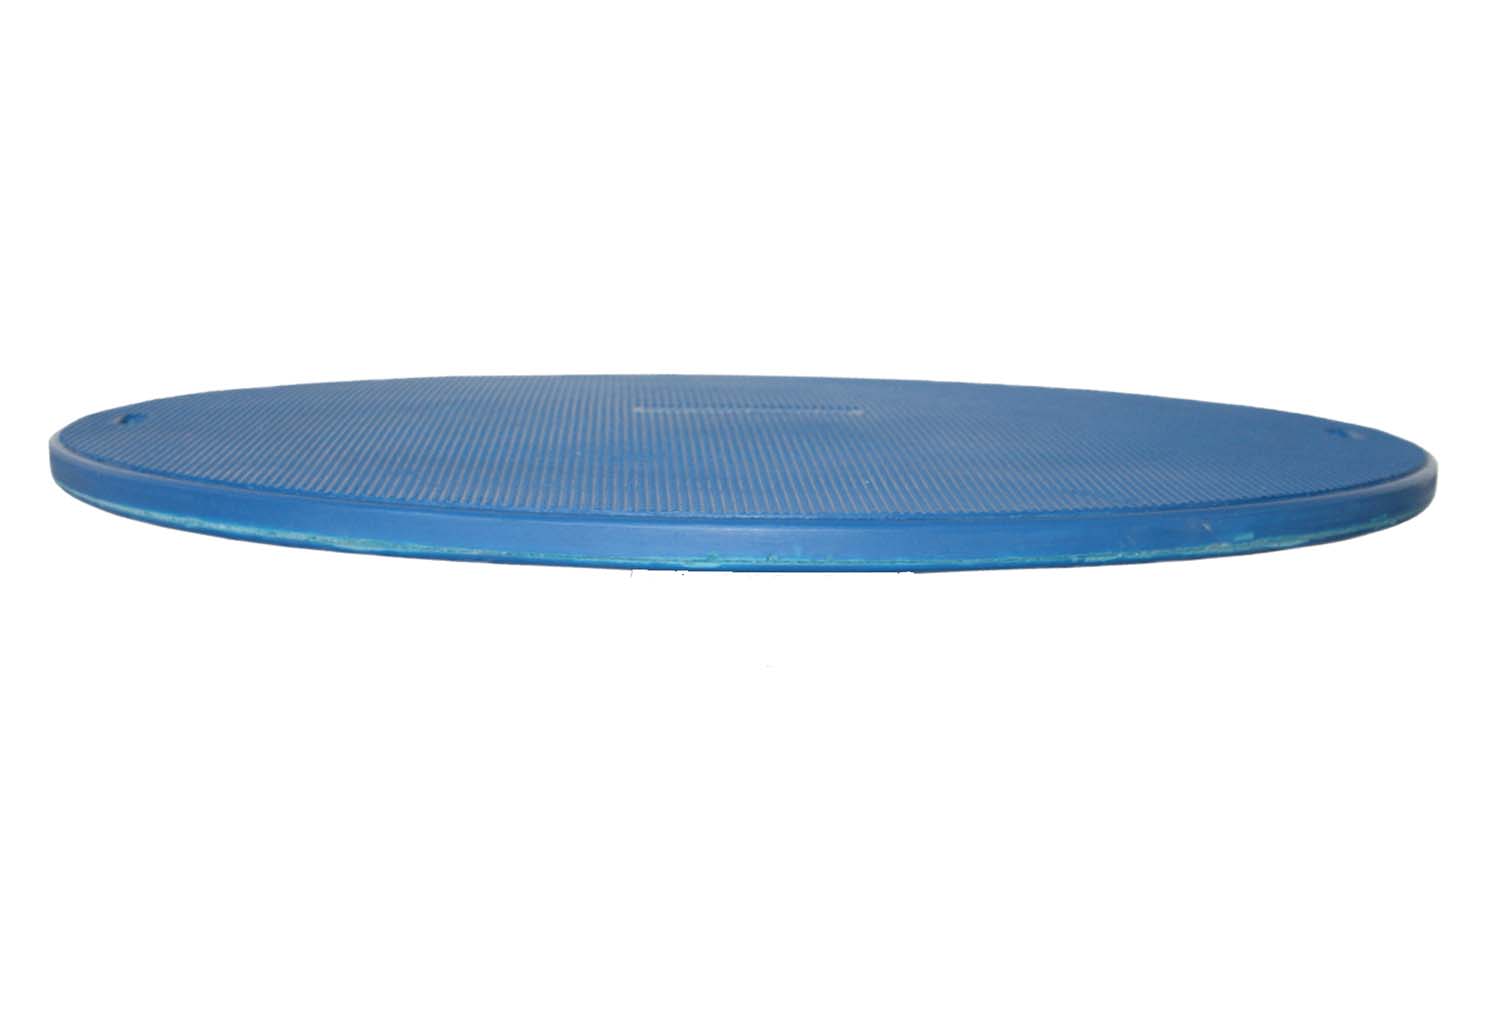 30" Circular Board for the Cando Stability Trainer